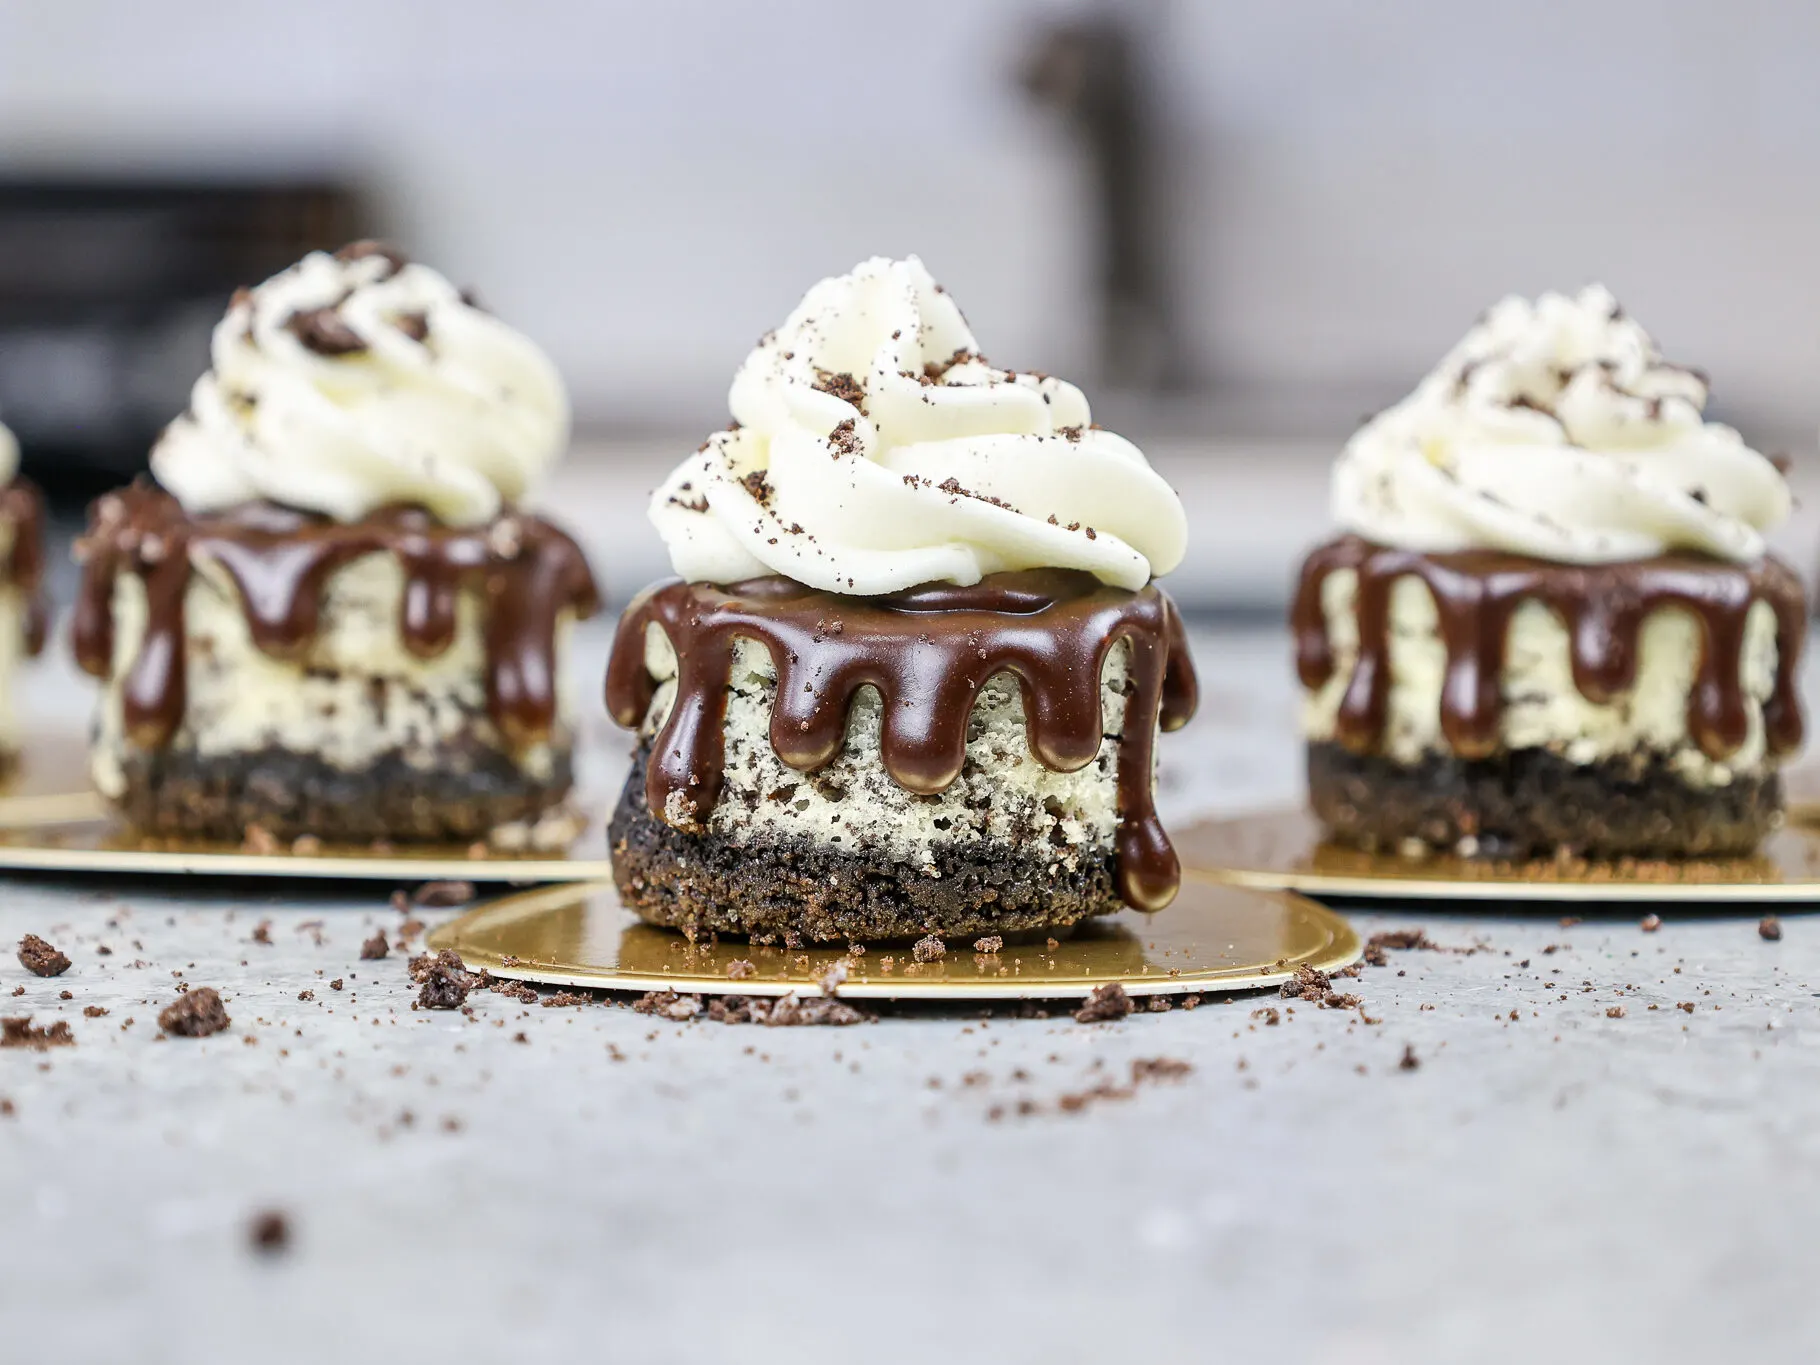 image of mini oreo cheesecakes lined up  and decorated with a chocolate ganache drip and whipped cream